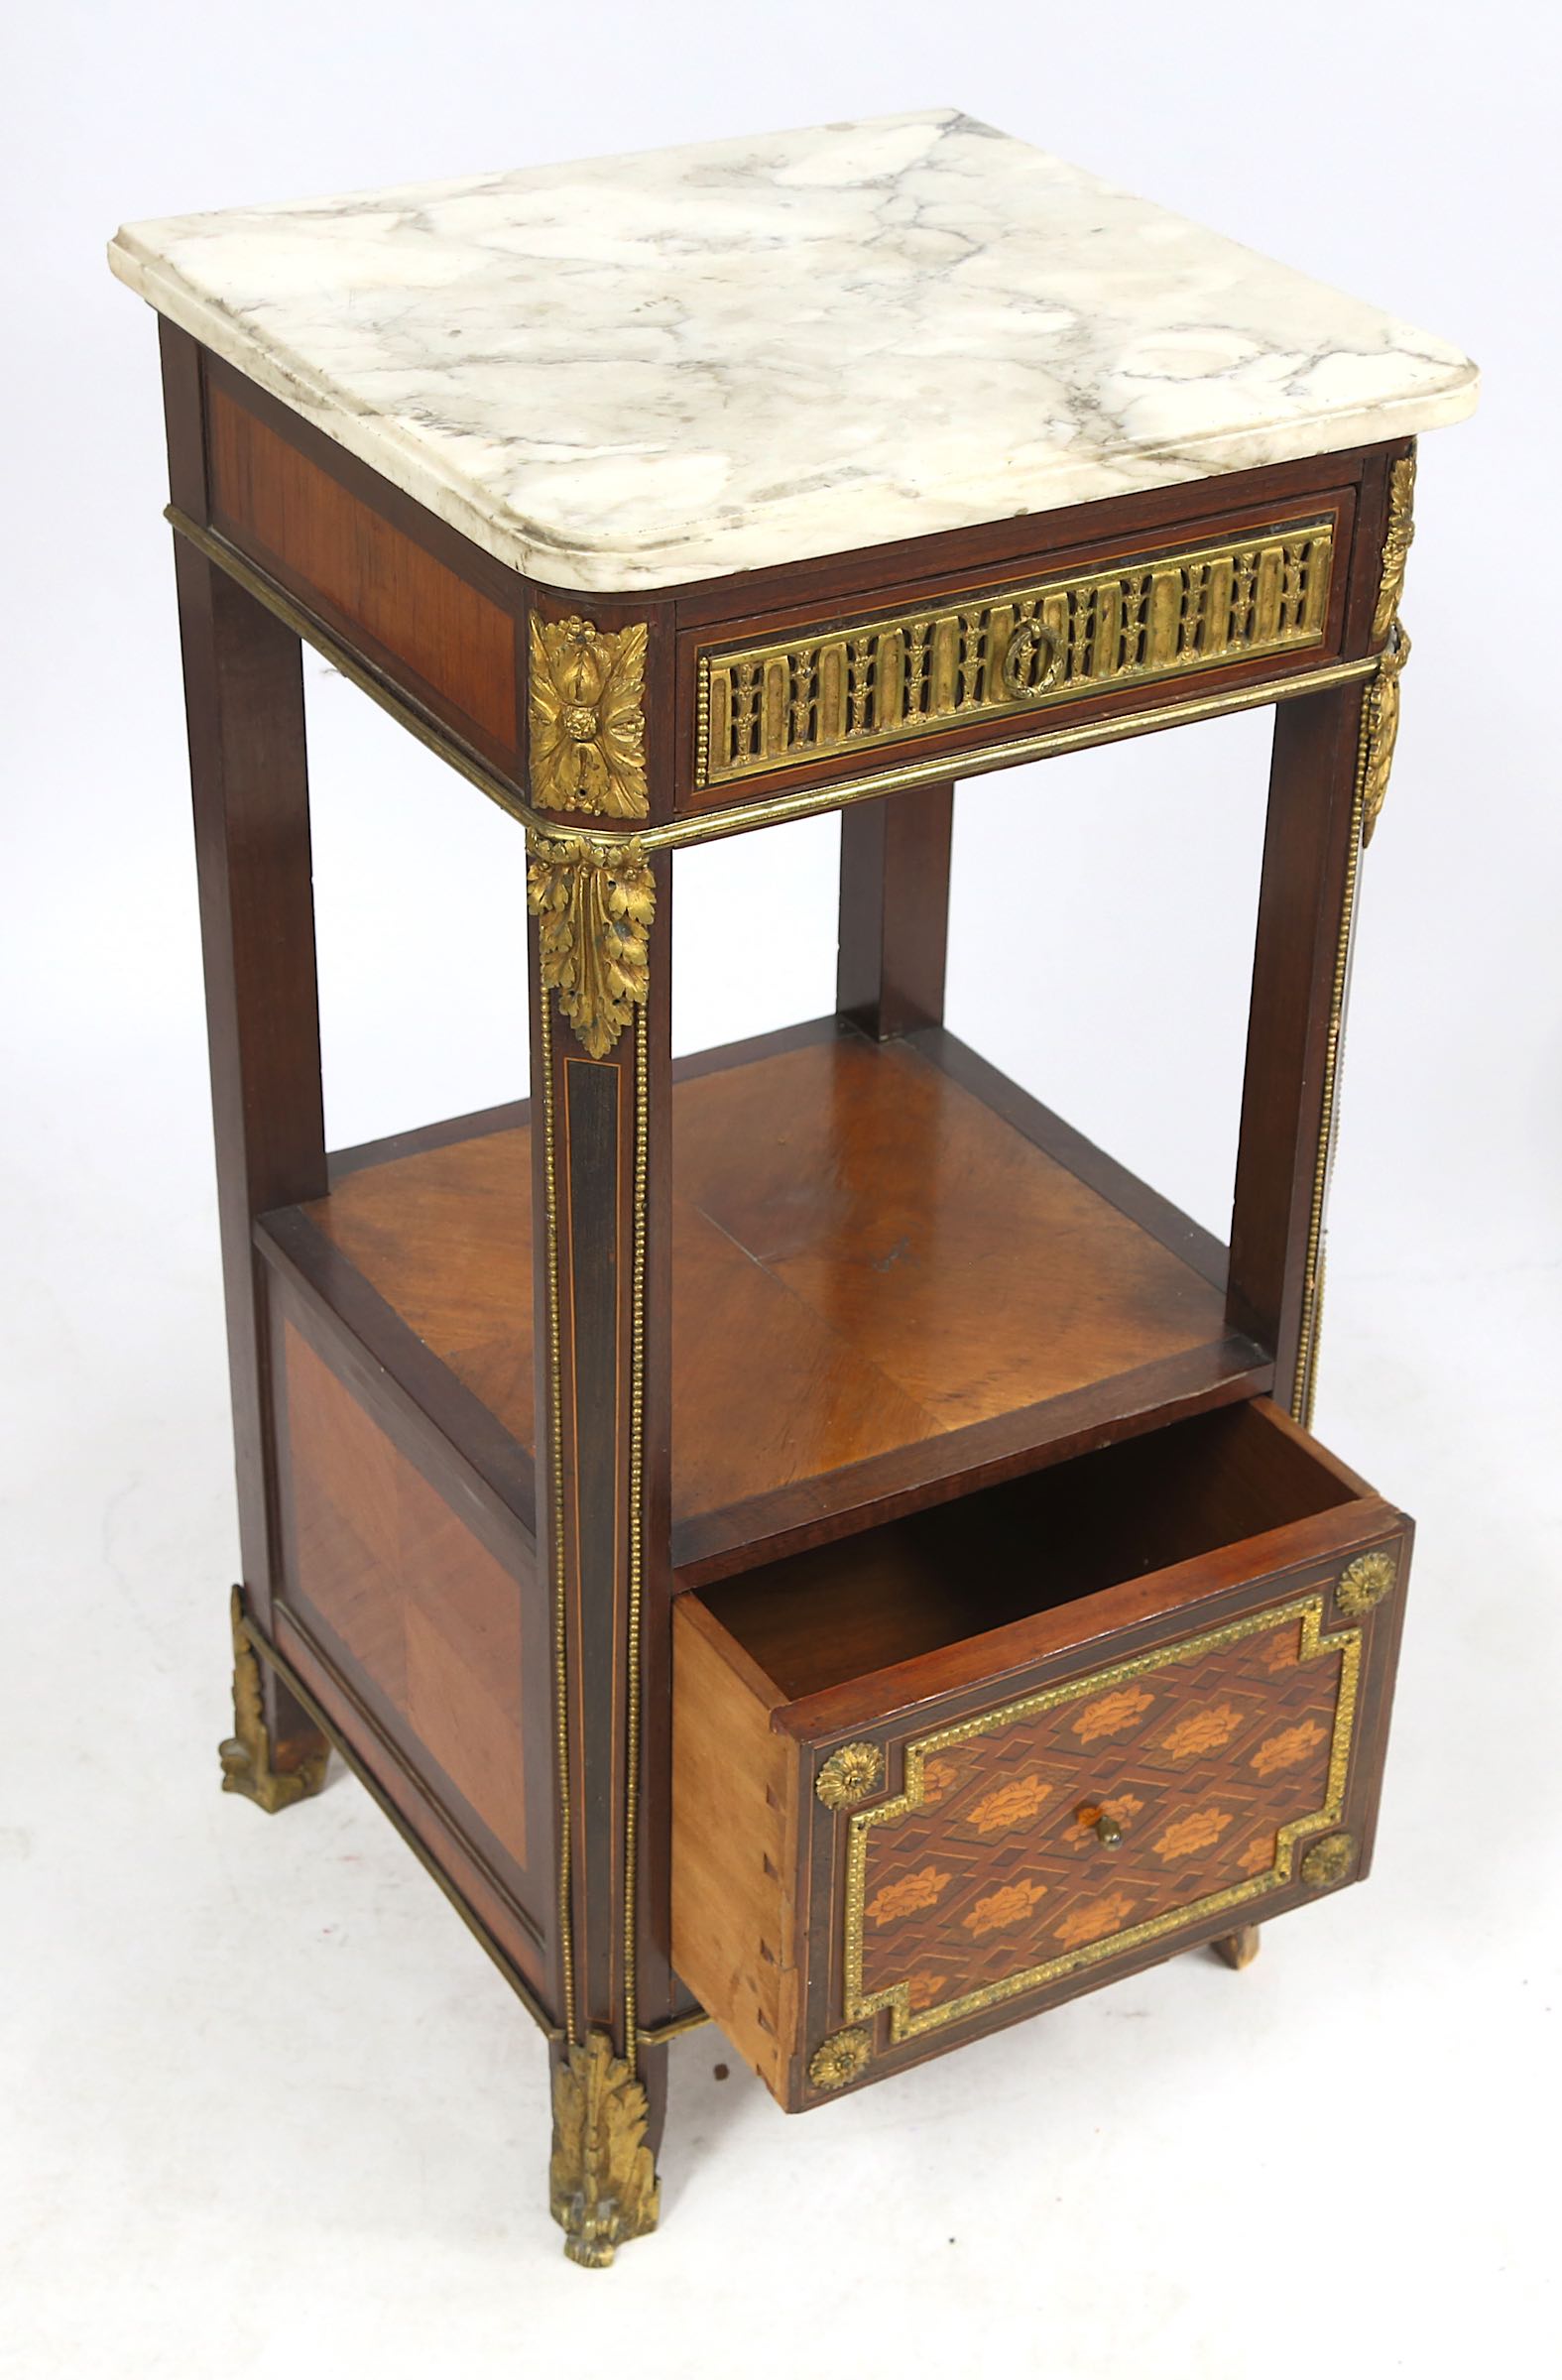 A LATE 19TH CENTURY FRENCH MAHOGANY, CUBE PARQUETR - Image 7 of 7